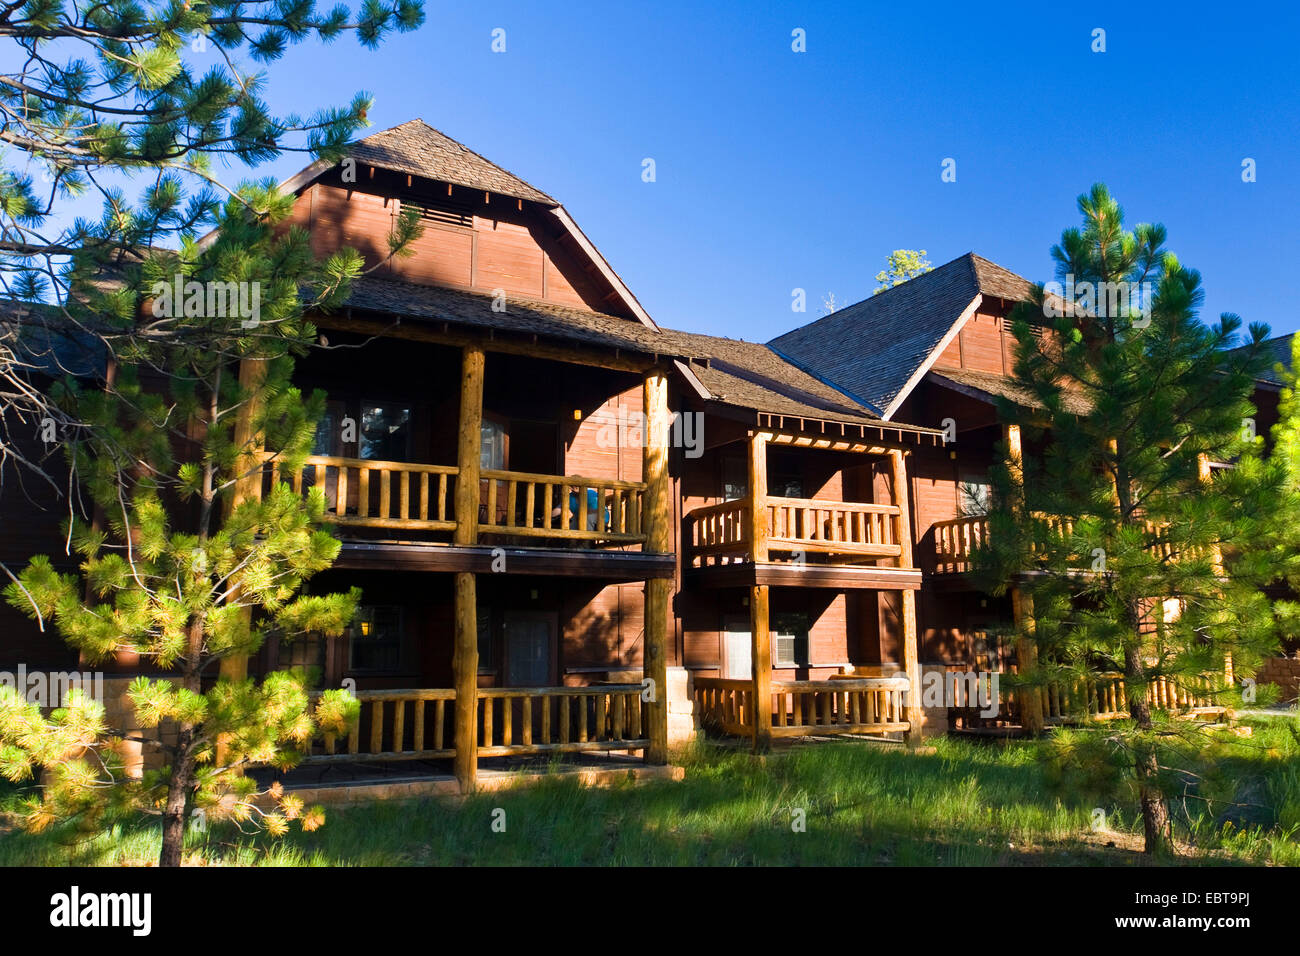 Bryce Canyon Lodge, holiday accommodations in blockhouse style, USA, Utah, Bryce Canyon National Park Stock Photo